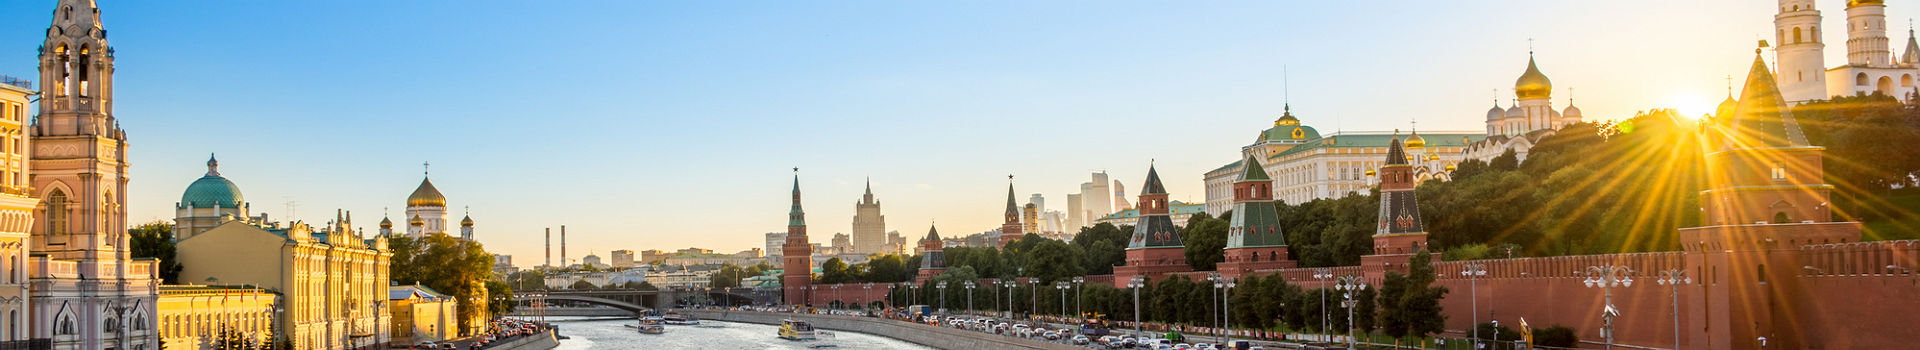 Panorama of the Moskva river with the Kremlin's towers at sunset, Moscow, Russia